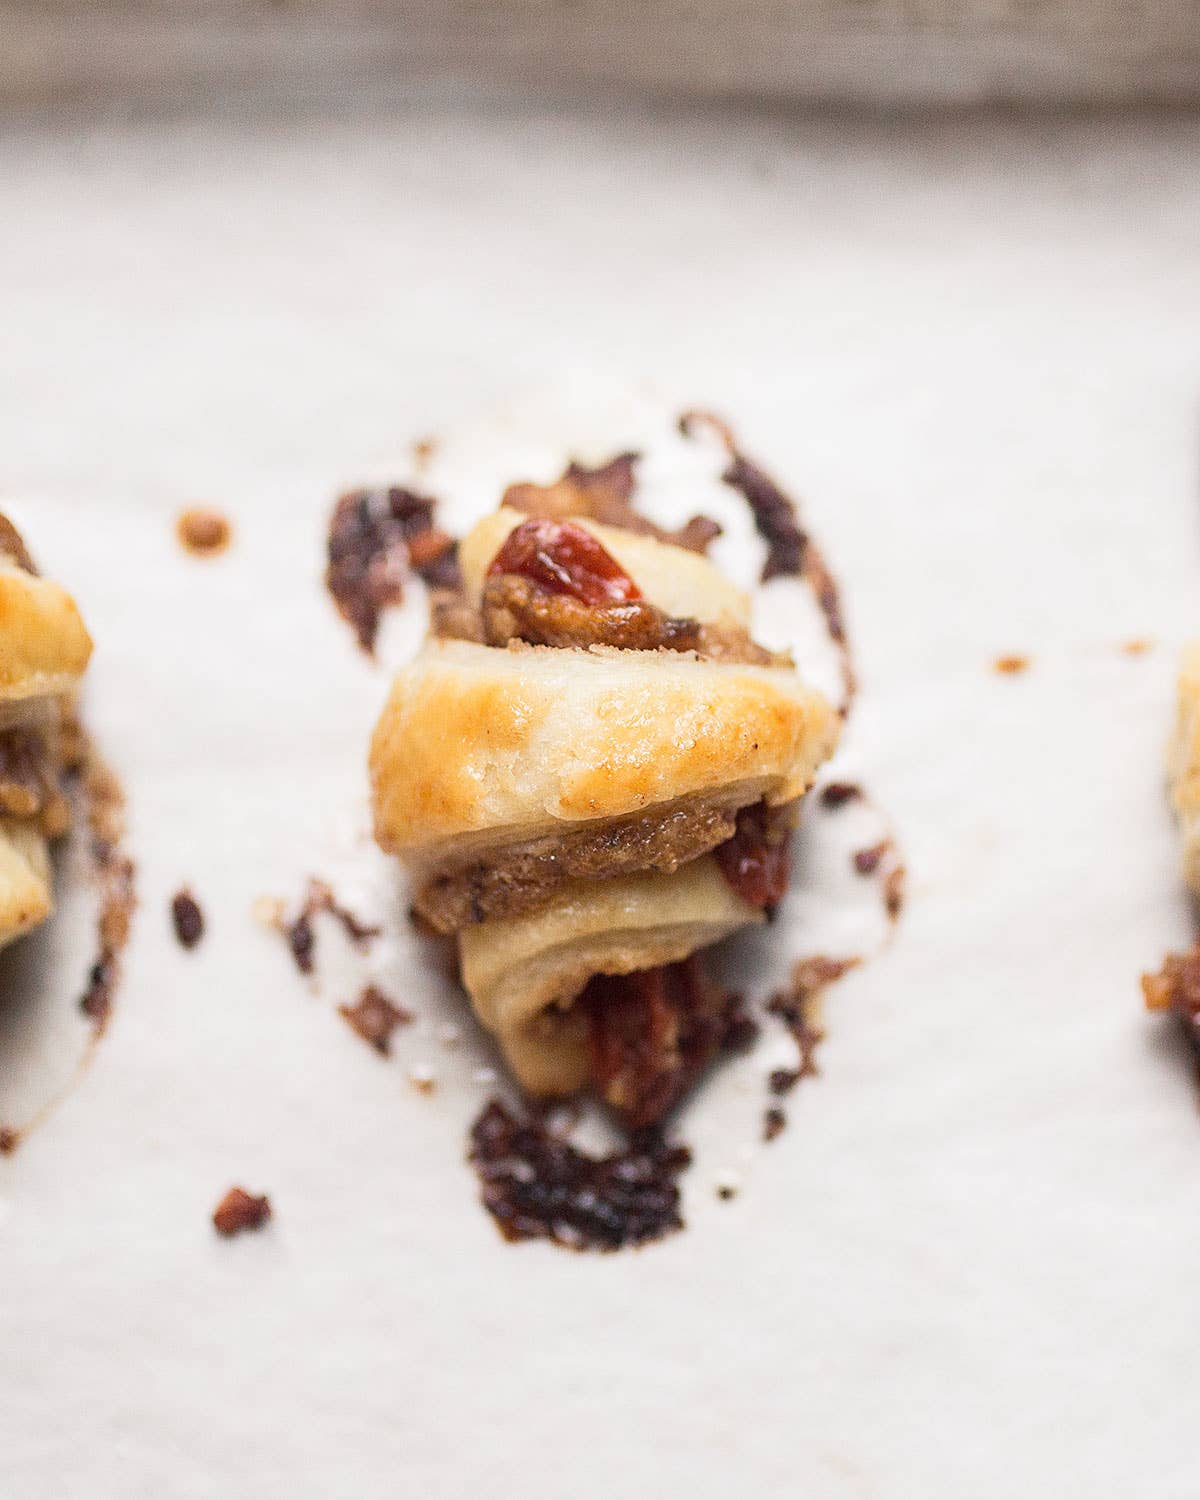 Chinese Rugelach